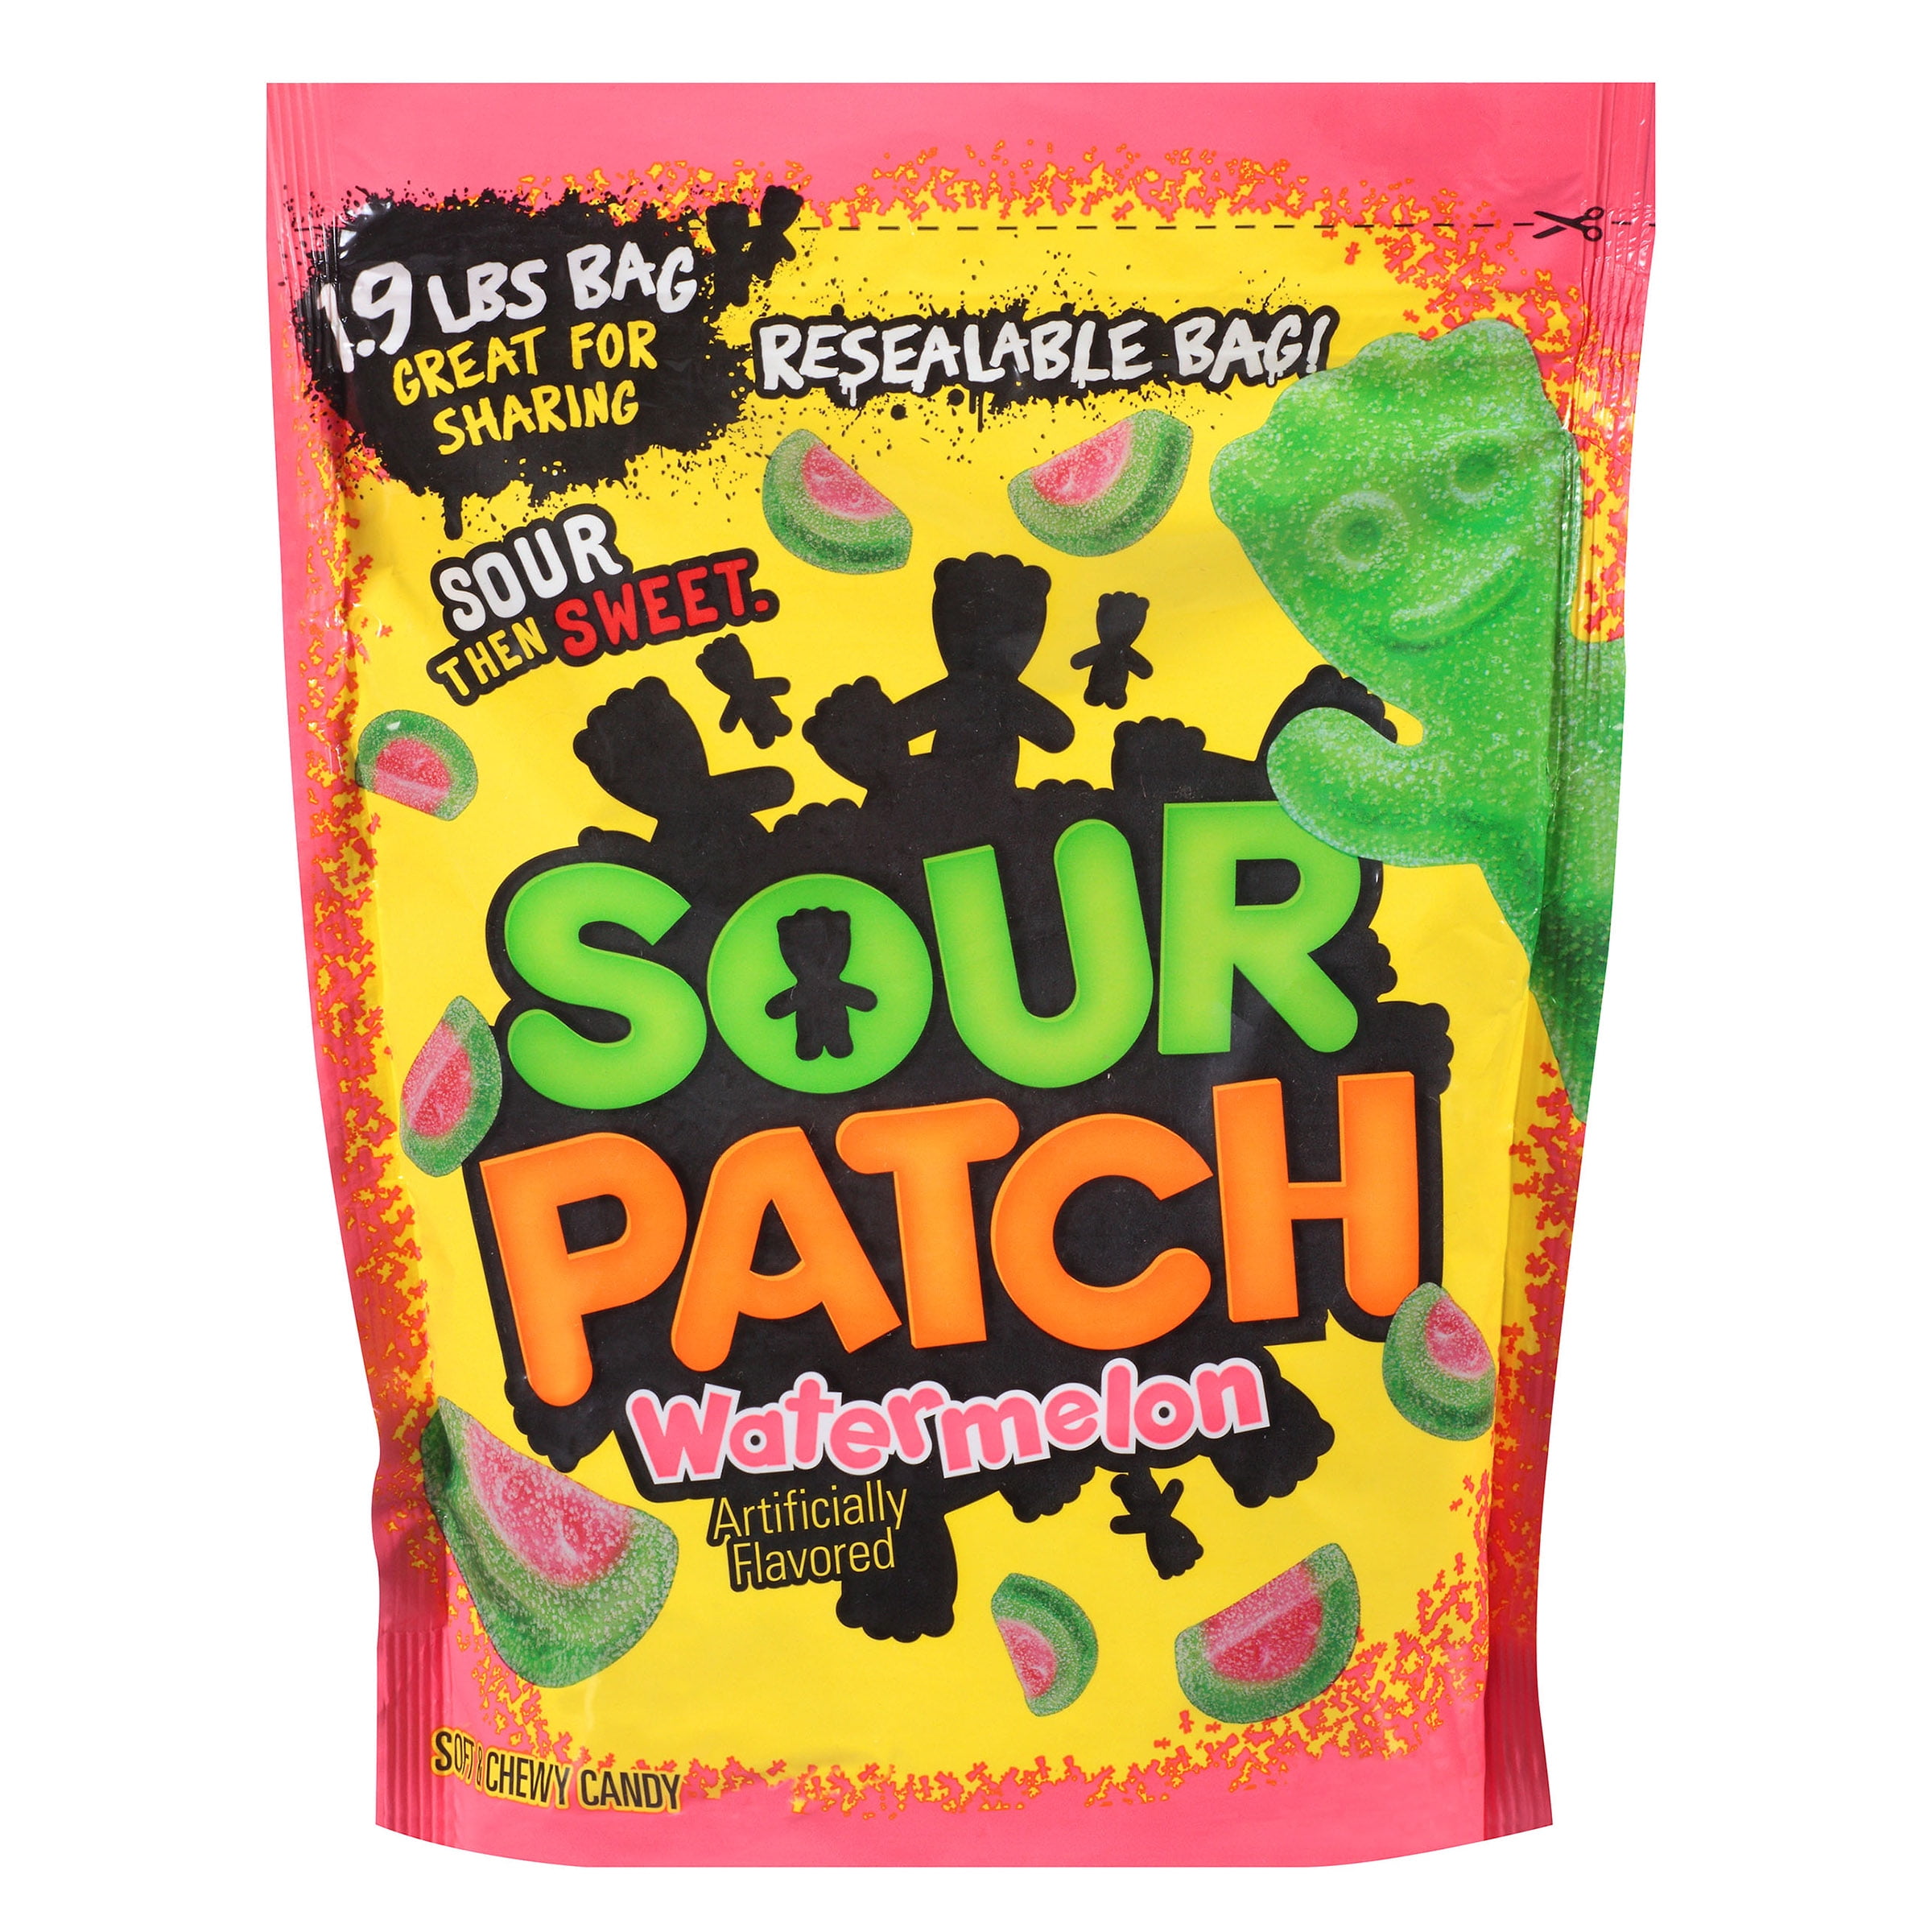 Sour patch kids. Sour Patch Soft and Chewy Candy Kids. Sour Patch. Sour Patch Kids Watermelon.